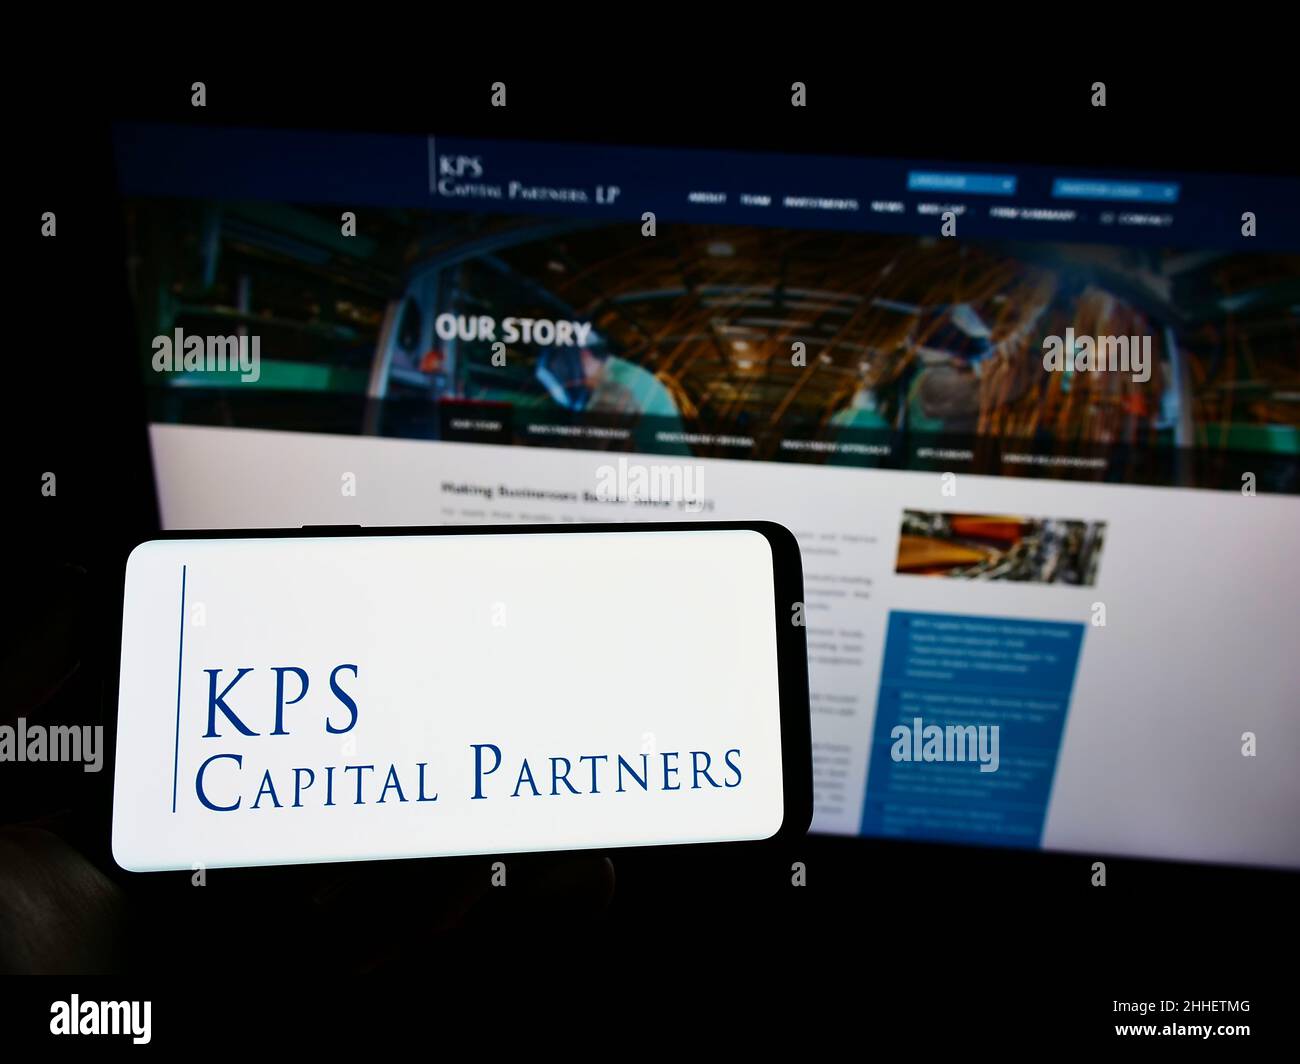 Person holding mobile phone with logo of US investment company KPS Capital Partners LP on screen in front of web page. Focus on phone display. Stock Photo